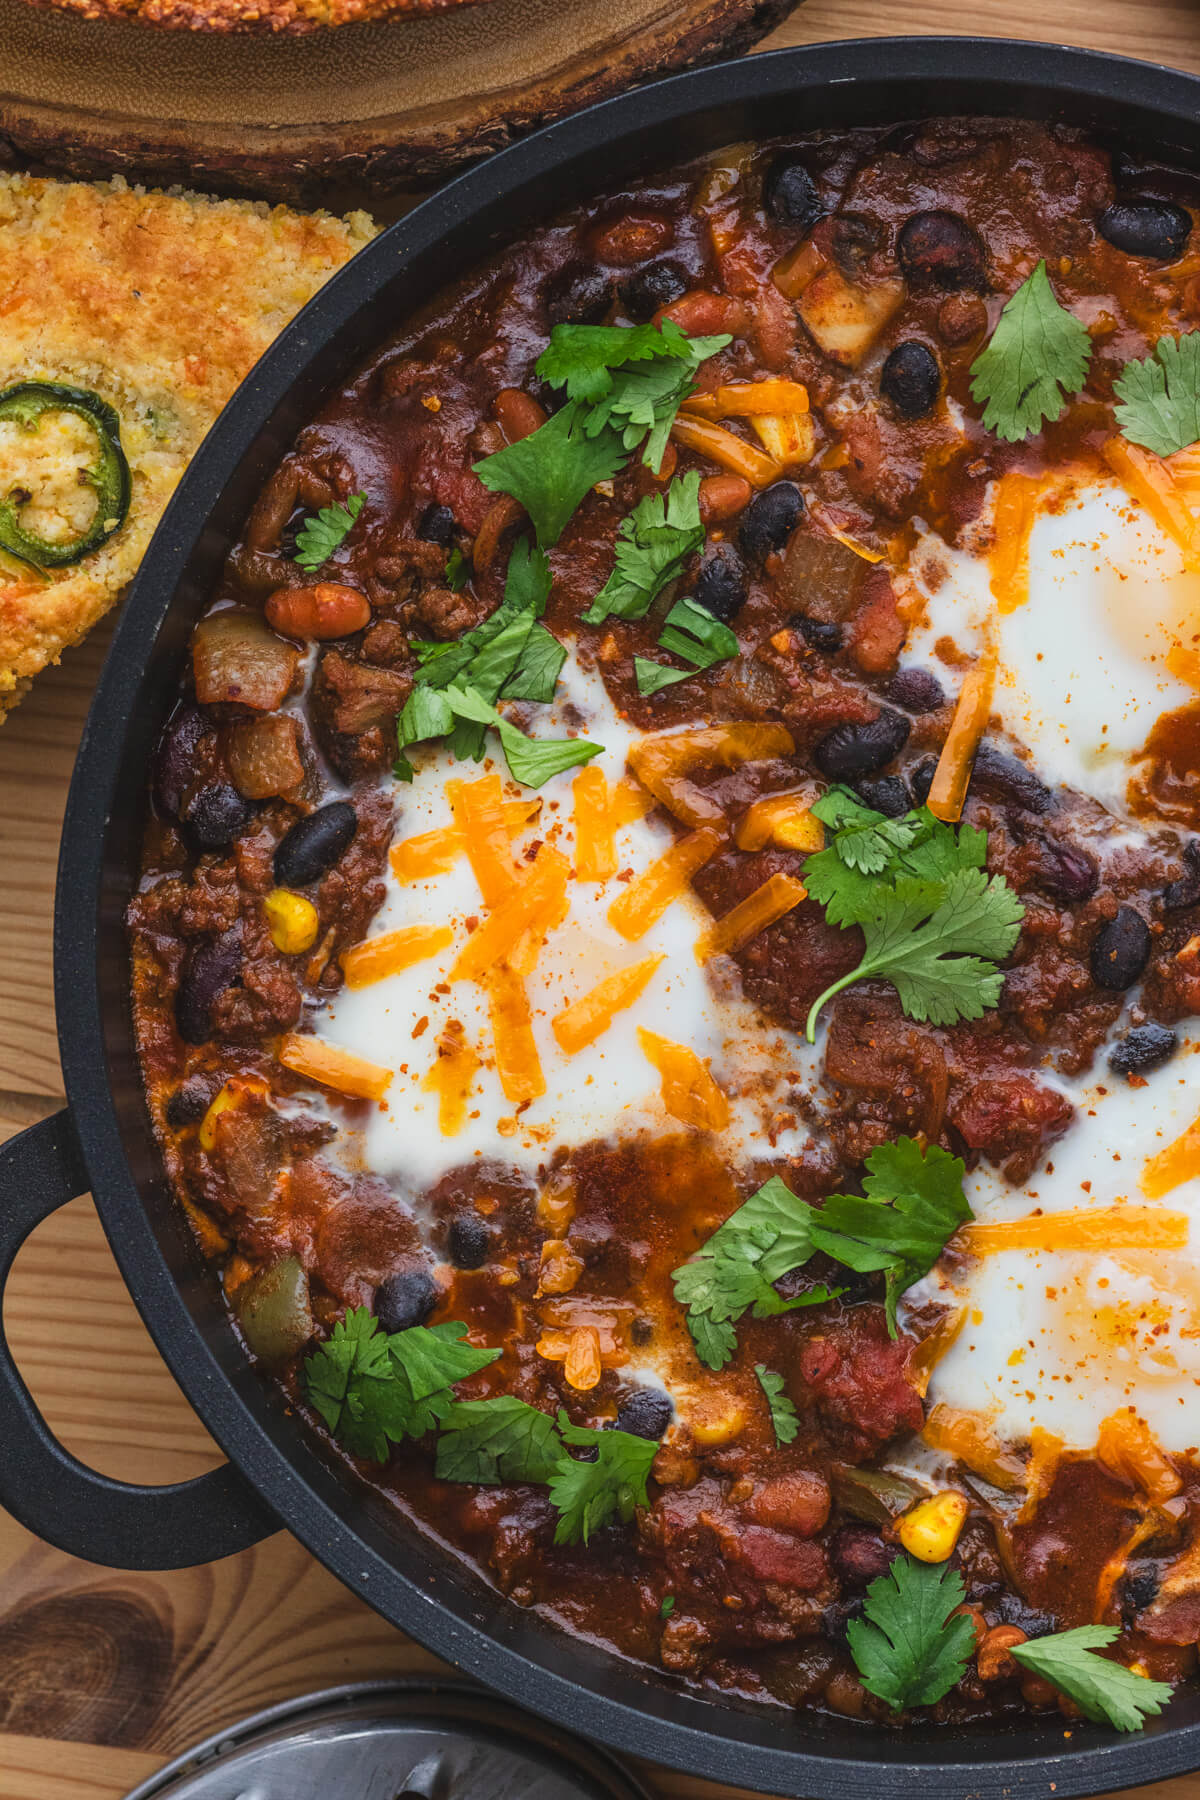 A cast iron skillet full of baked chili and eggs beside jalapeno cheddar cornbread.